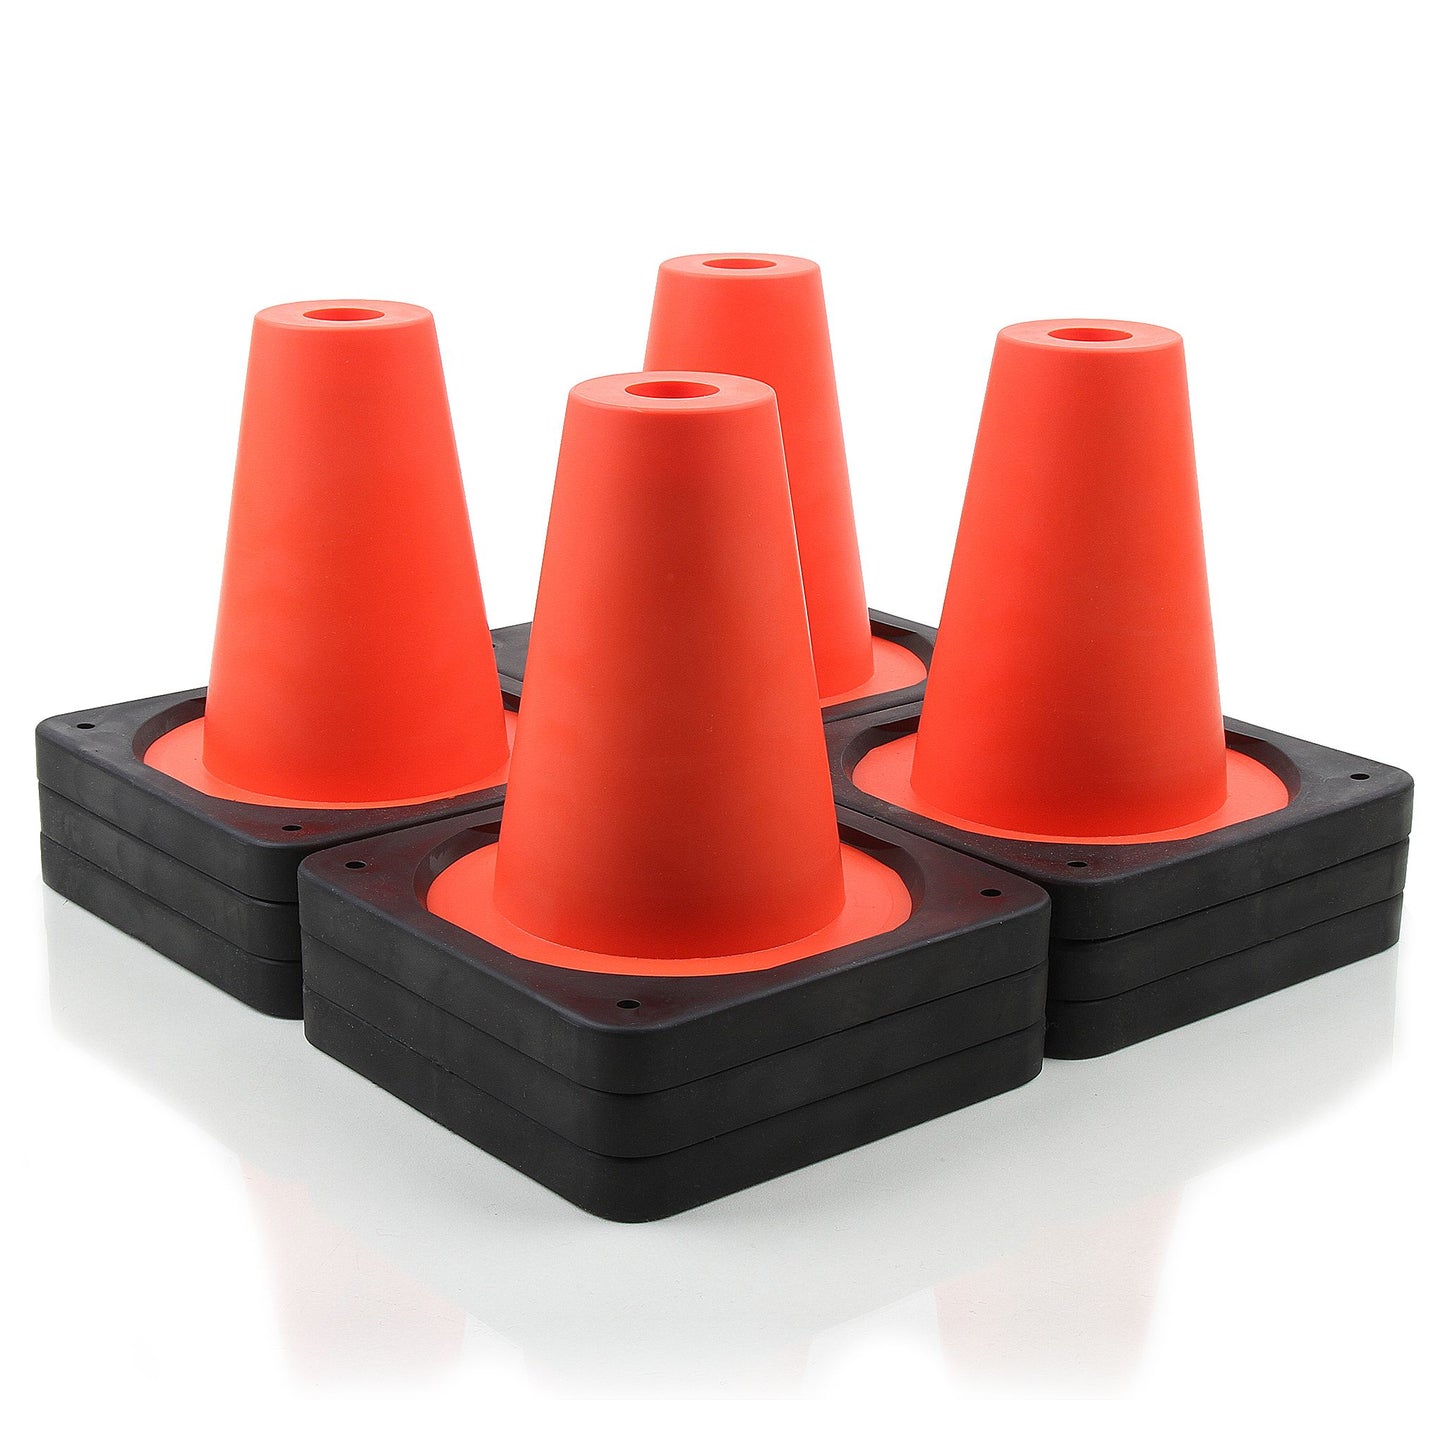 Weighted pylon with weight - 6" tall for ice hockey